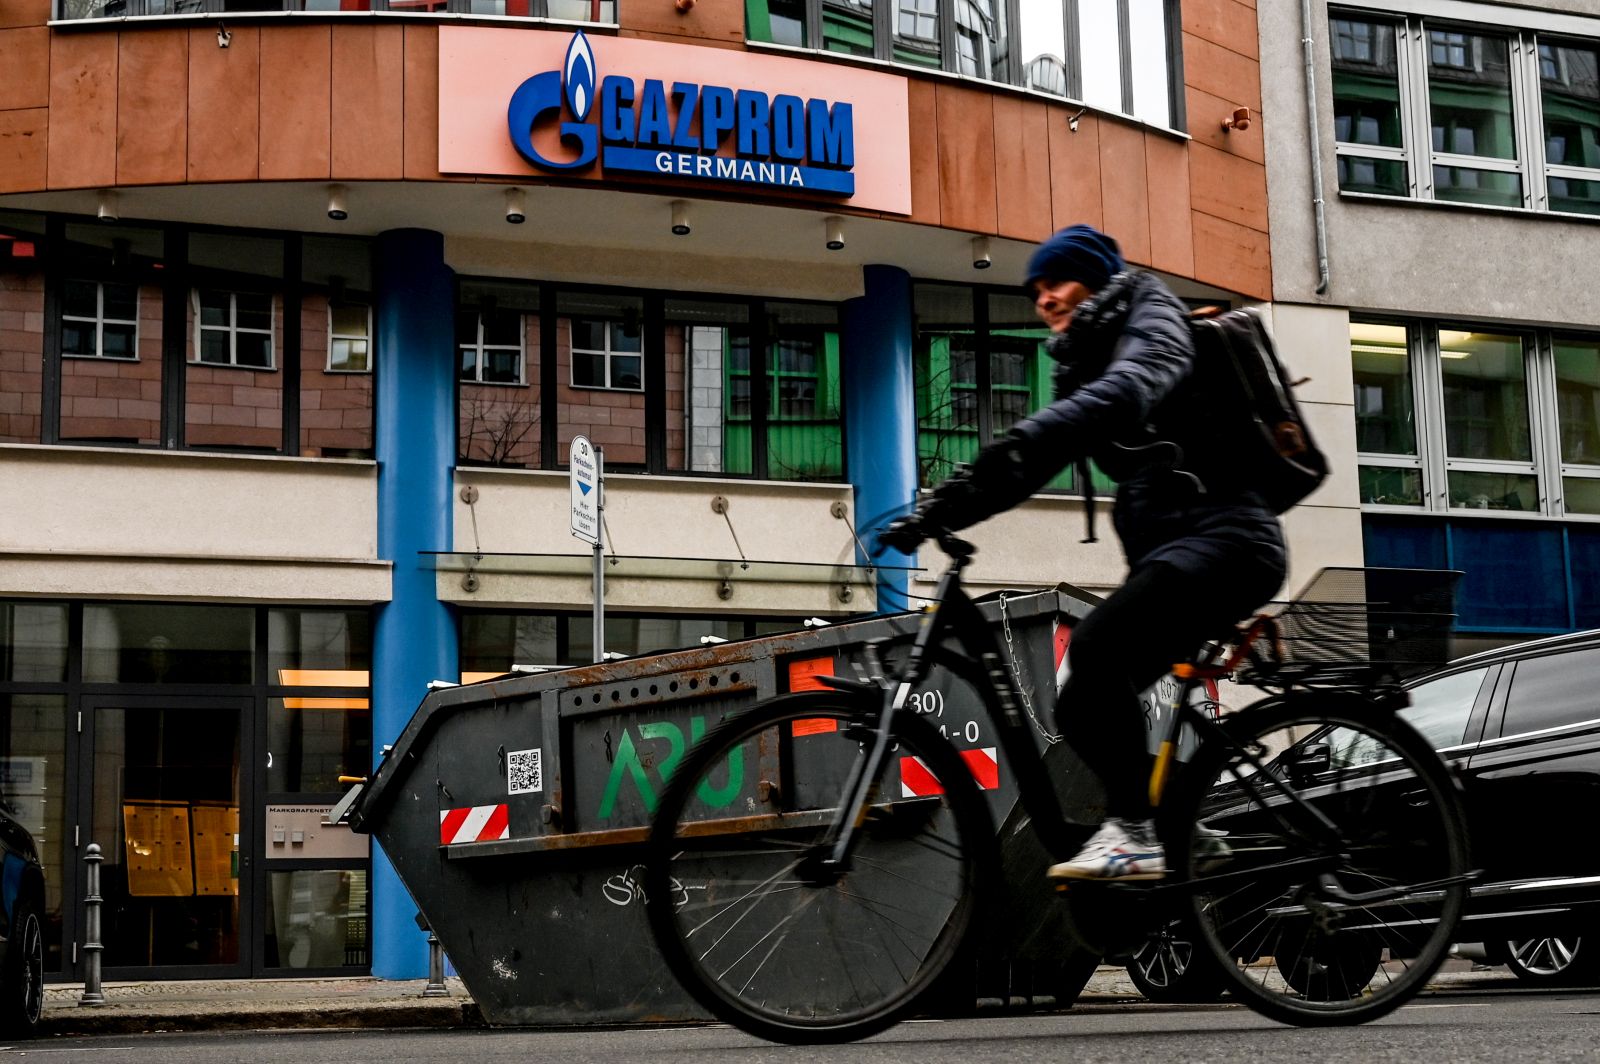 epa09872273 A cyclist passes by Gazprom headquarters in Berlin, Germany, 05 April 2022. German Federal Network Agency on 04 April announced that it has taken over control of Russian gas company German subsidiary Gazprom Germania. The Agency will be used as a trustee until 30 September to ensure proper management of the company.  EPA/FILIP SINGER